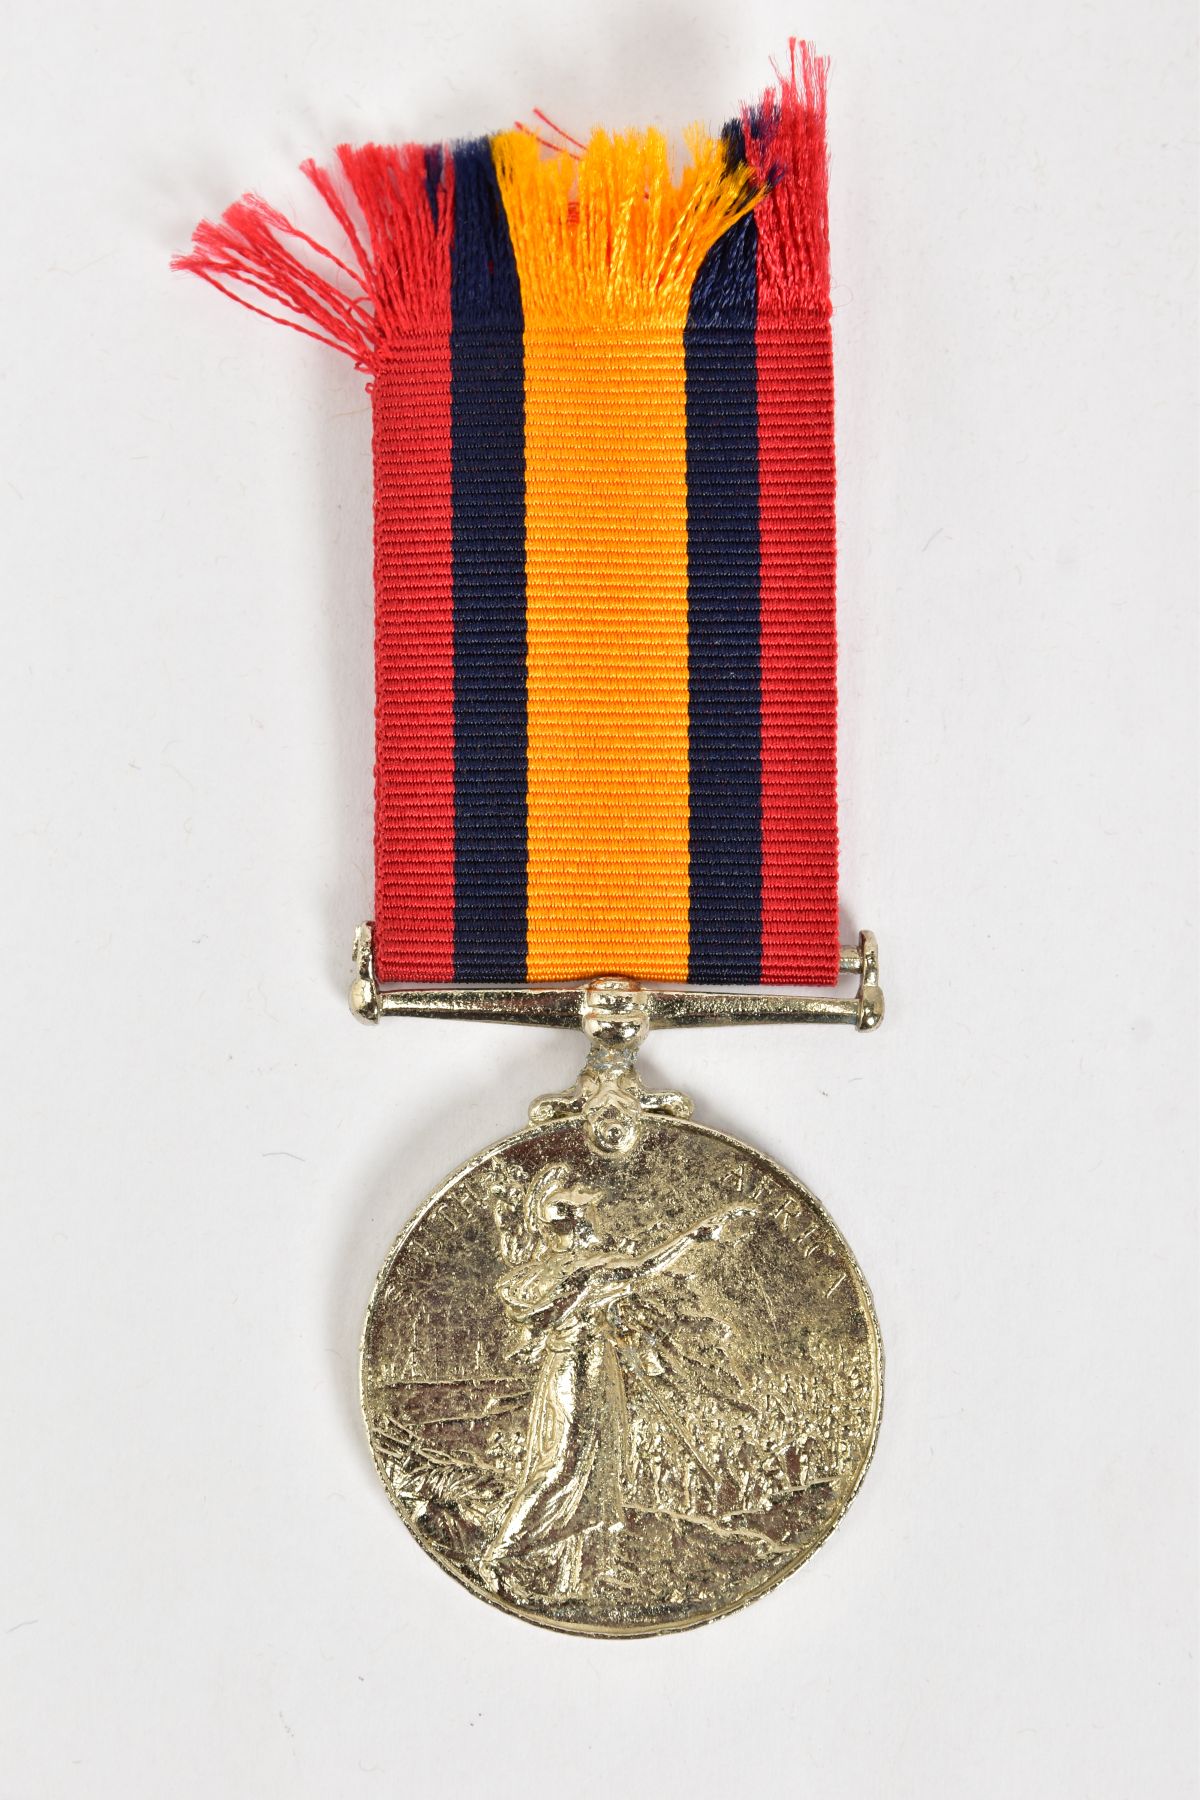 A CAST REPRODUCTION OF A QUEENS SOUTH AFRICA MEDAL, no bars, named 0733 W SAPr T. Comins, TEL BN R. - Image 3 of 7